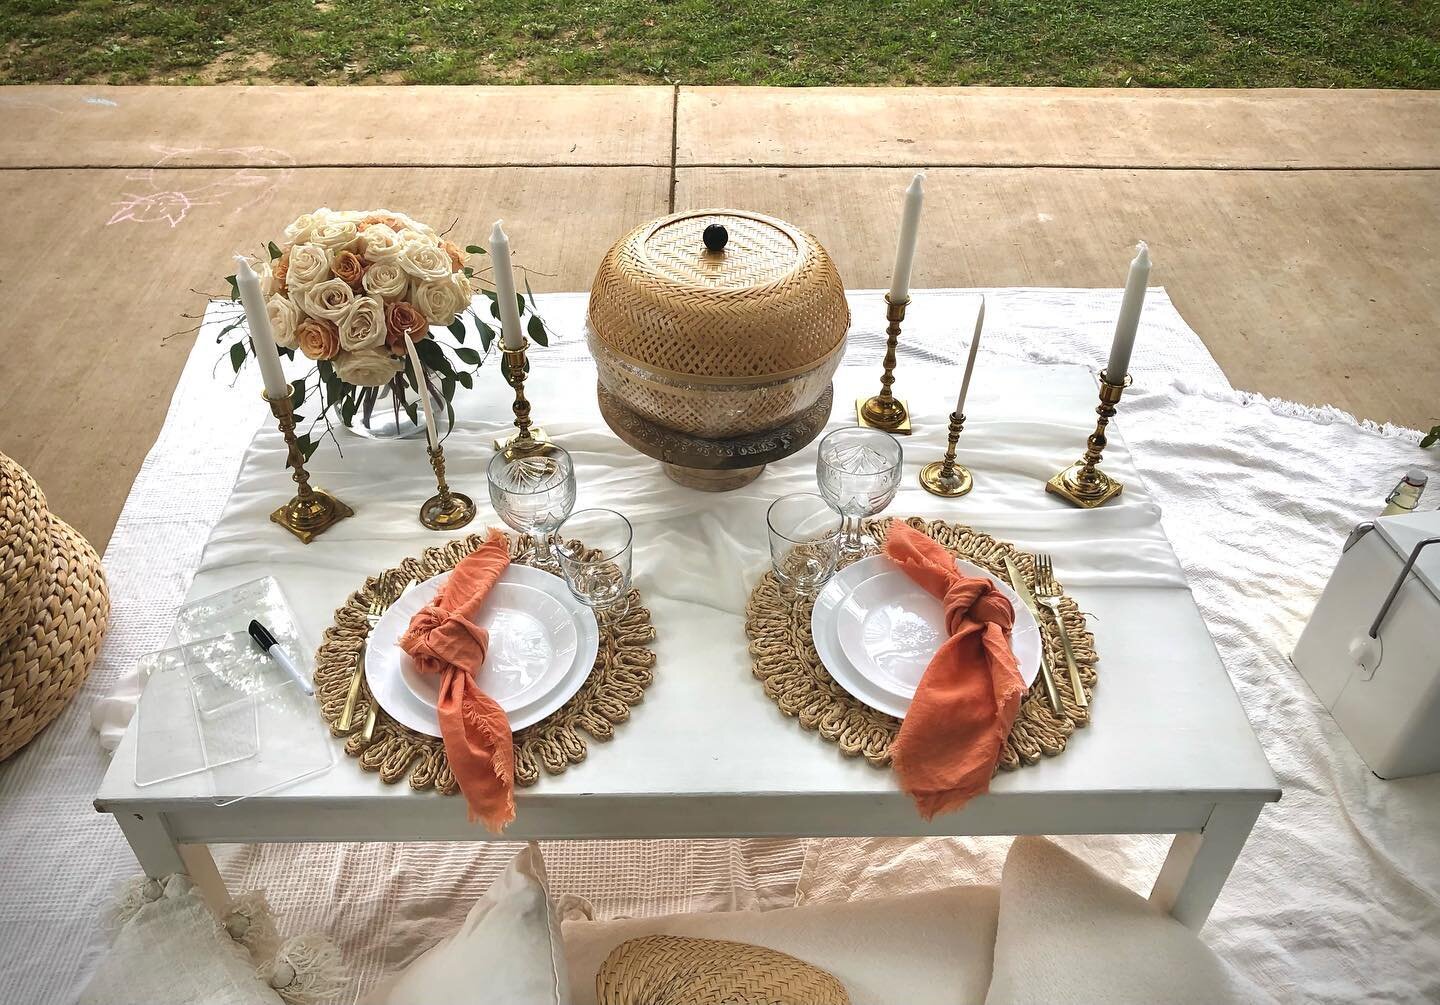 After popping the question, follow up with the perfect picnic setup 💕💕💕
.
.
.
.
.

#thegatheringpicnicco&nbsp;#clt&nbsp;#cltpicnic&nbsp;#cltpicnics&nbsp;#charlottedate&nbsp;#charlottedatenight&nbsp;#charlottepicnic&nbsp;#charlottepicnics&nbsp;#cha